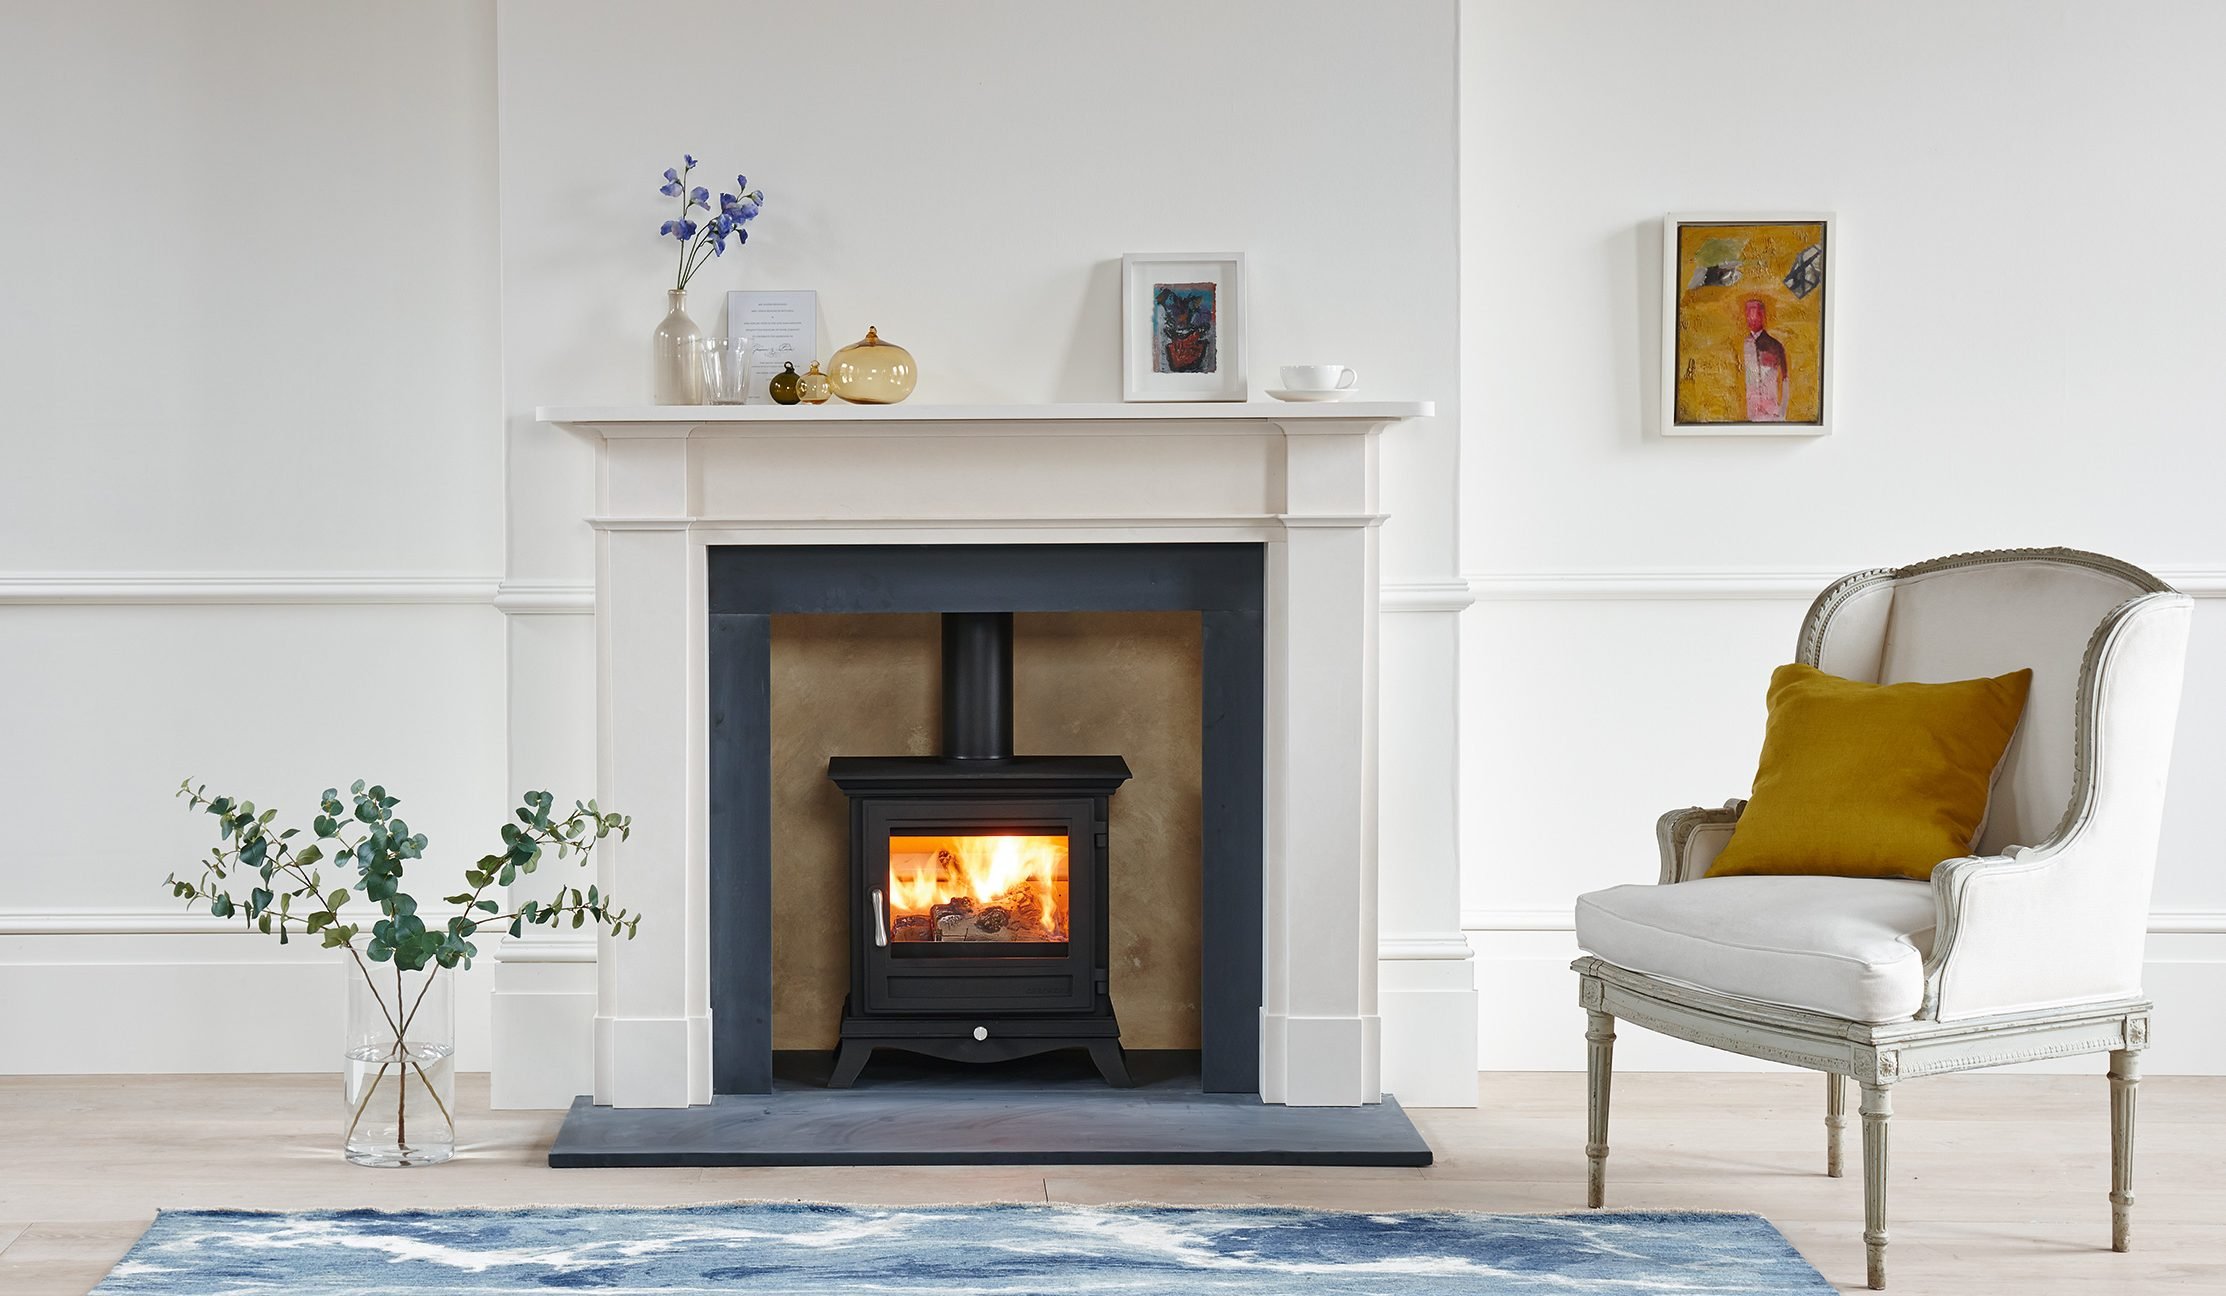 How To Use A Wood Burning Fireplace